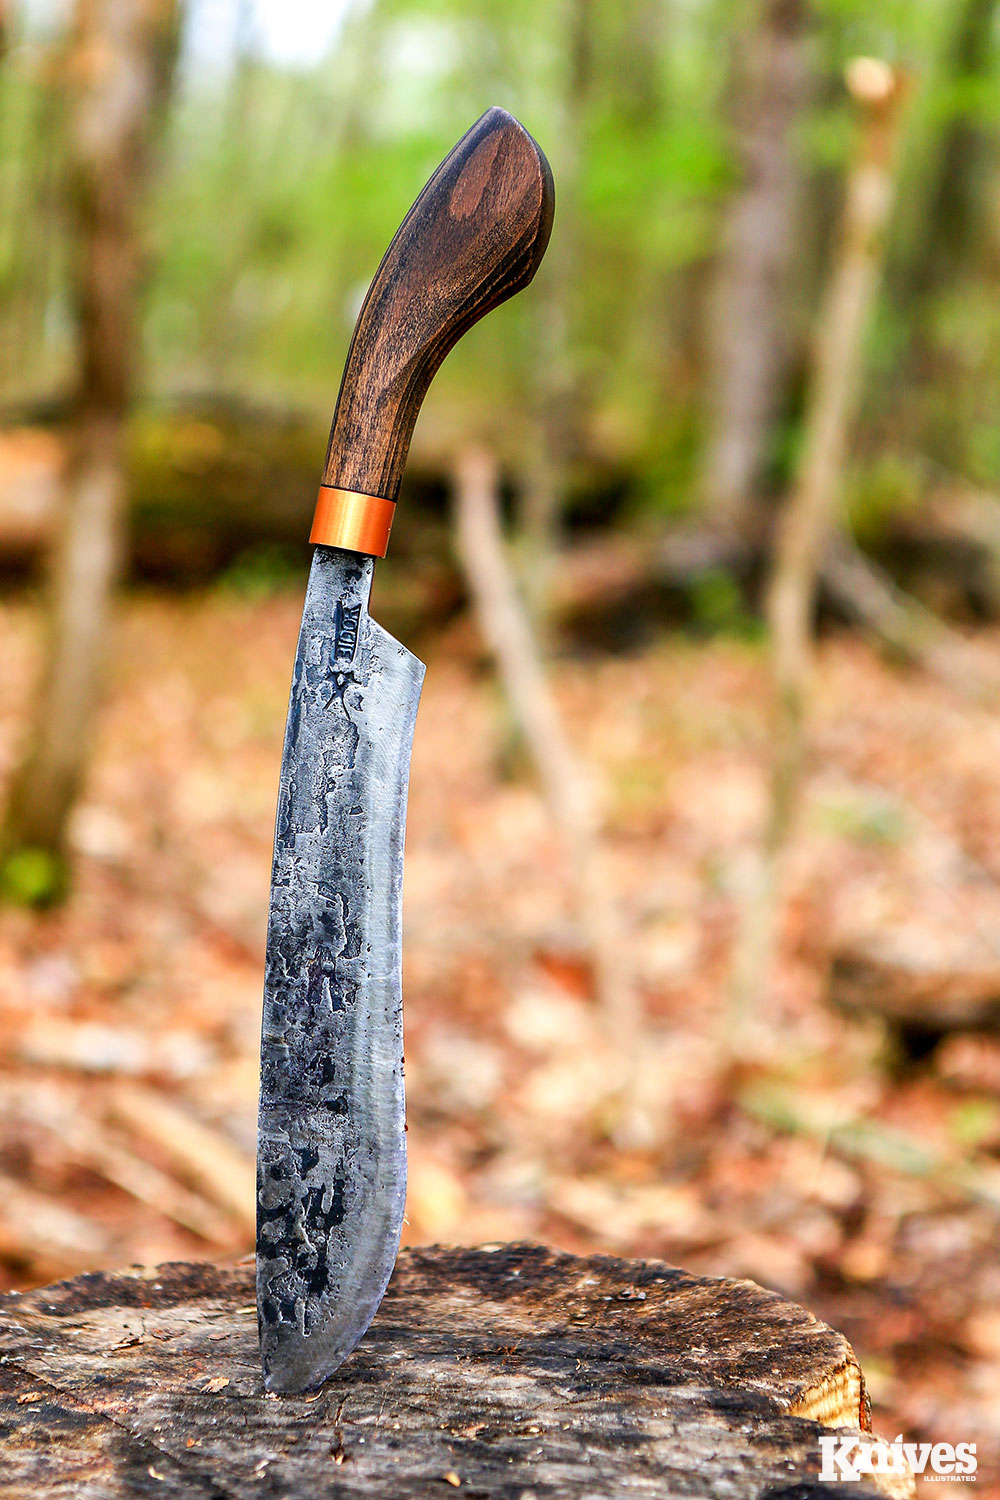 The My Parang Golok 135 has a 12 inch-long blade with 11 inches of cutting edge. 5160carbon steel on a 6.5 inch-long Eco Beech handle, with a copper sleeve over a single brass pin